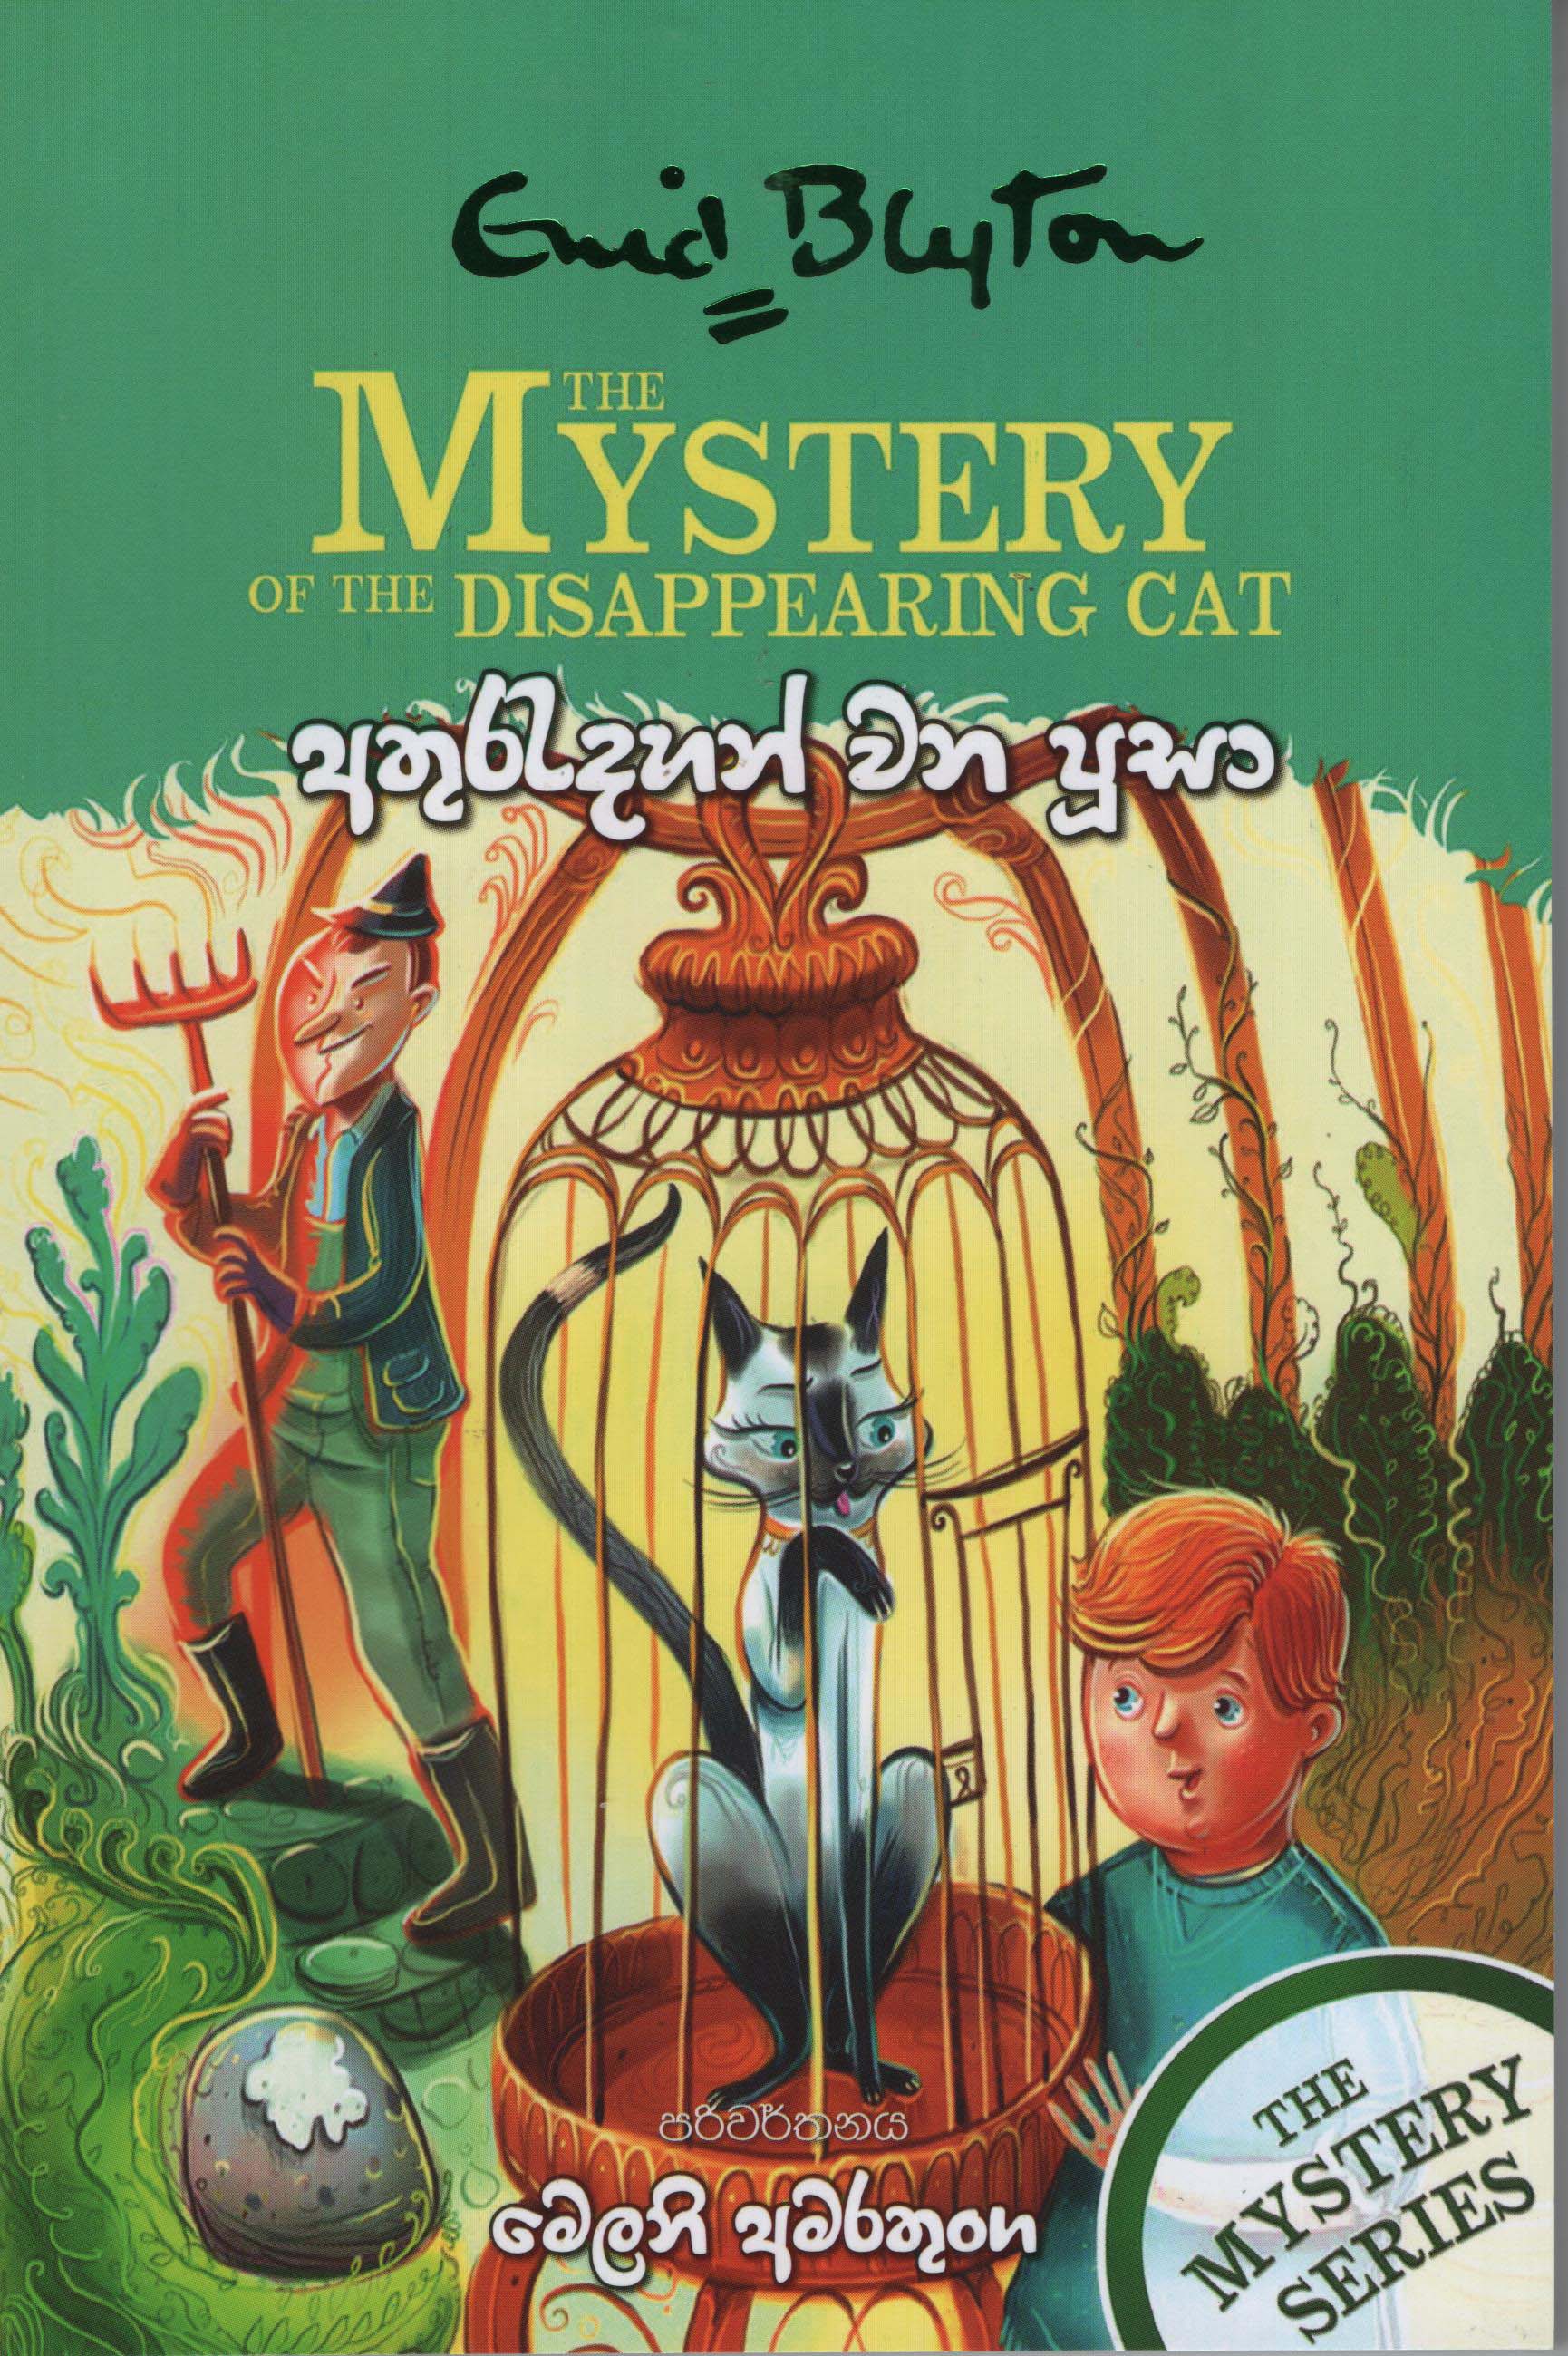 Athurudahan Wana Poosa - Translation of The Mystery of The Disappearing Cat by Enid Blyton